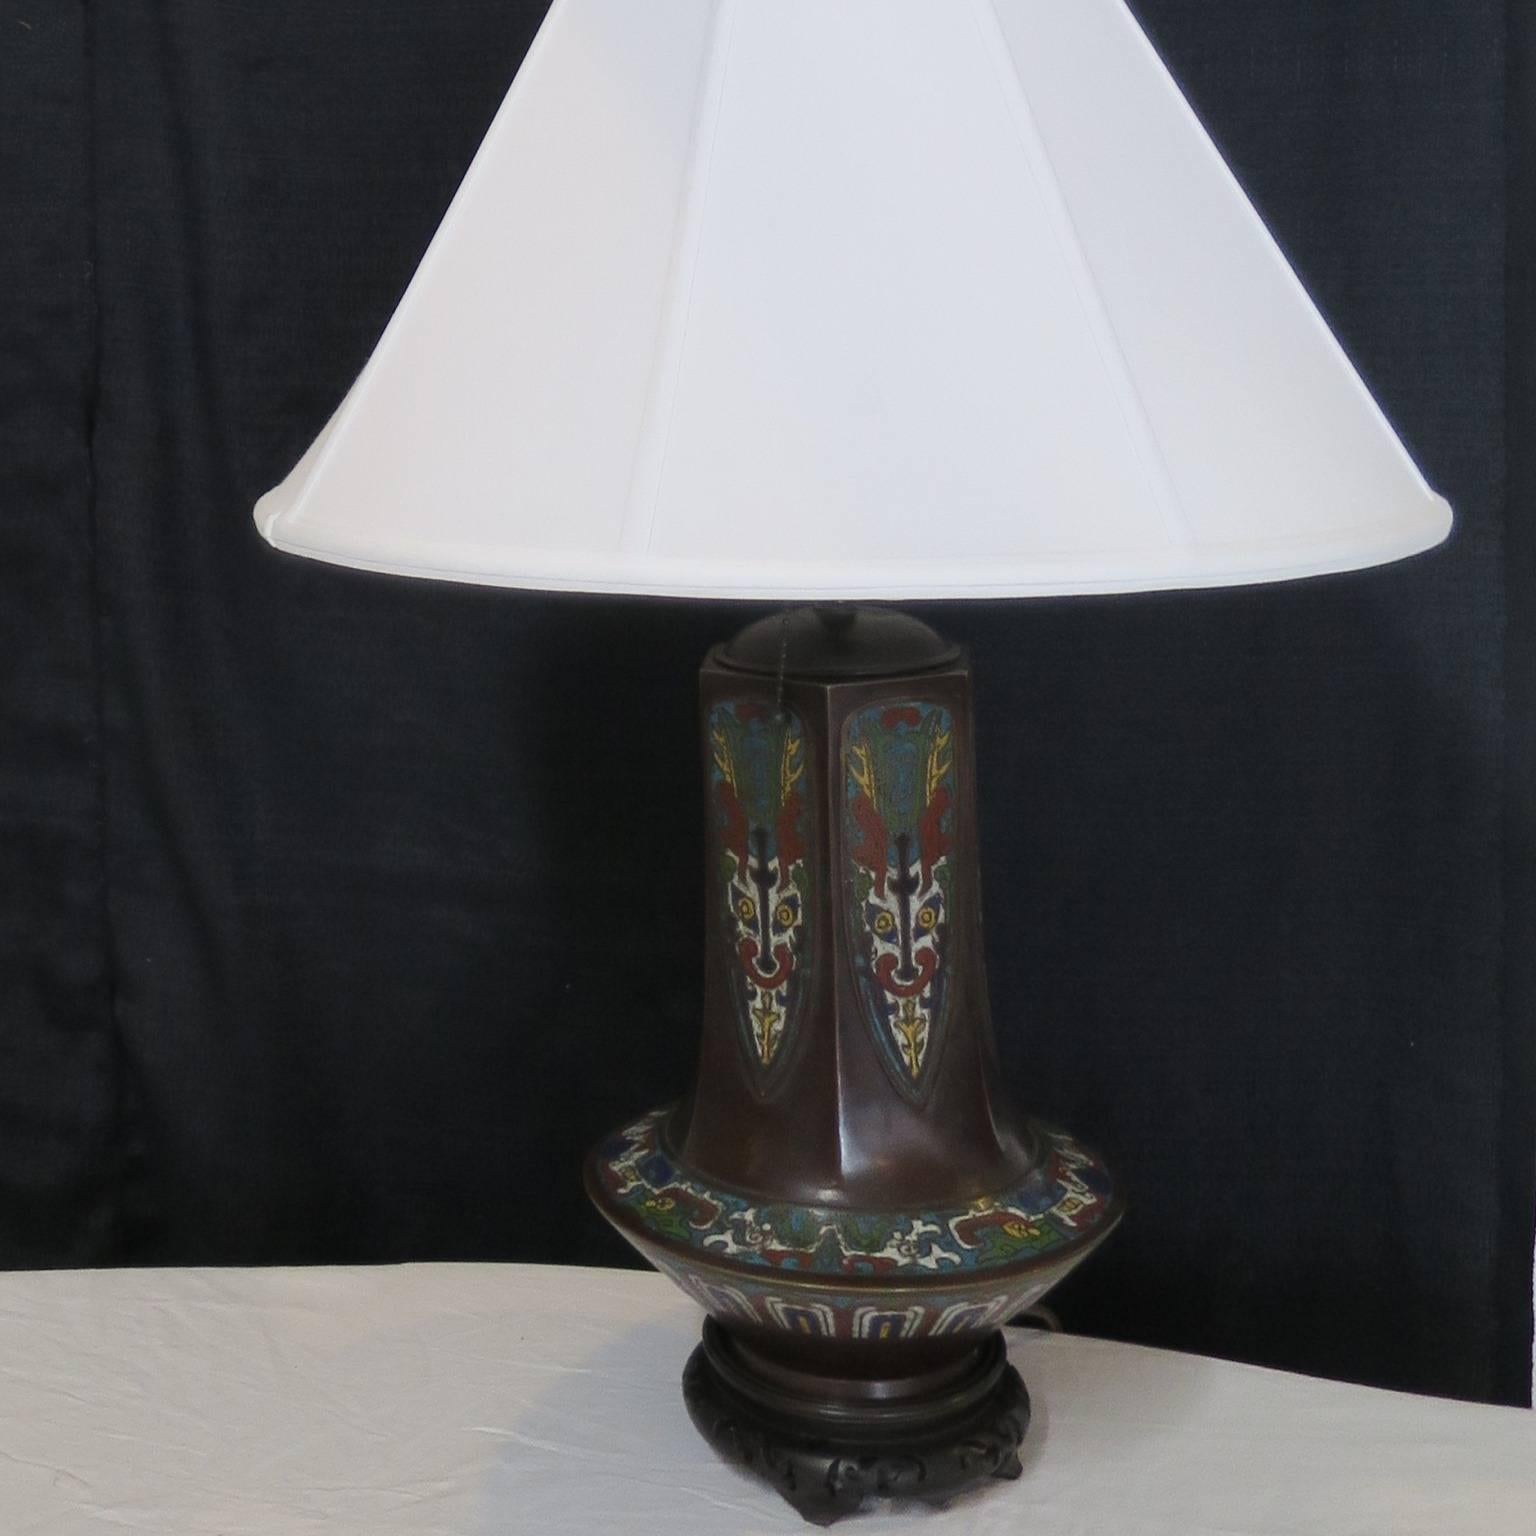 18th Century Chinese Cloisonné Enamel Bronze Vase 19th Century Mounted as a Table Lamp For Sale